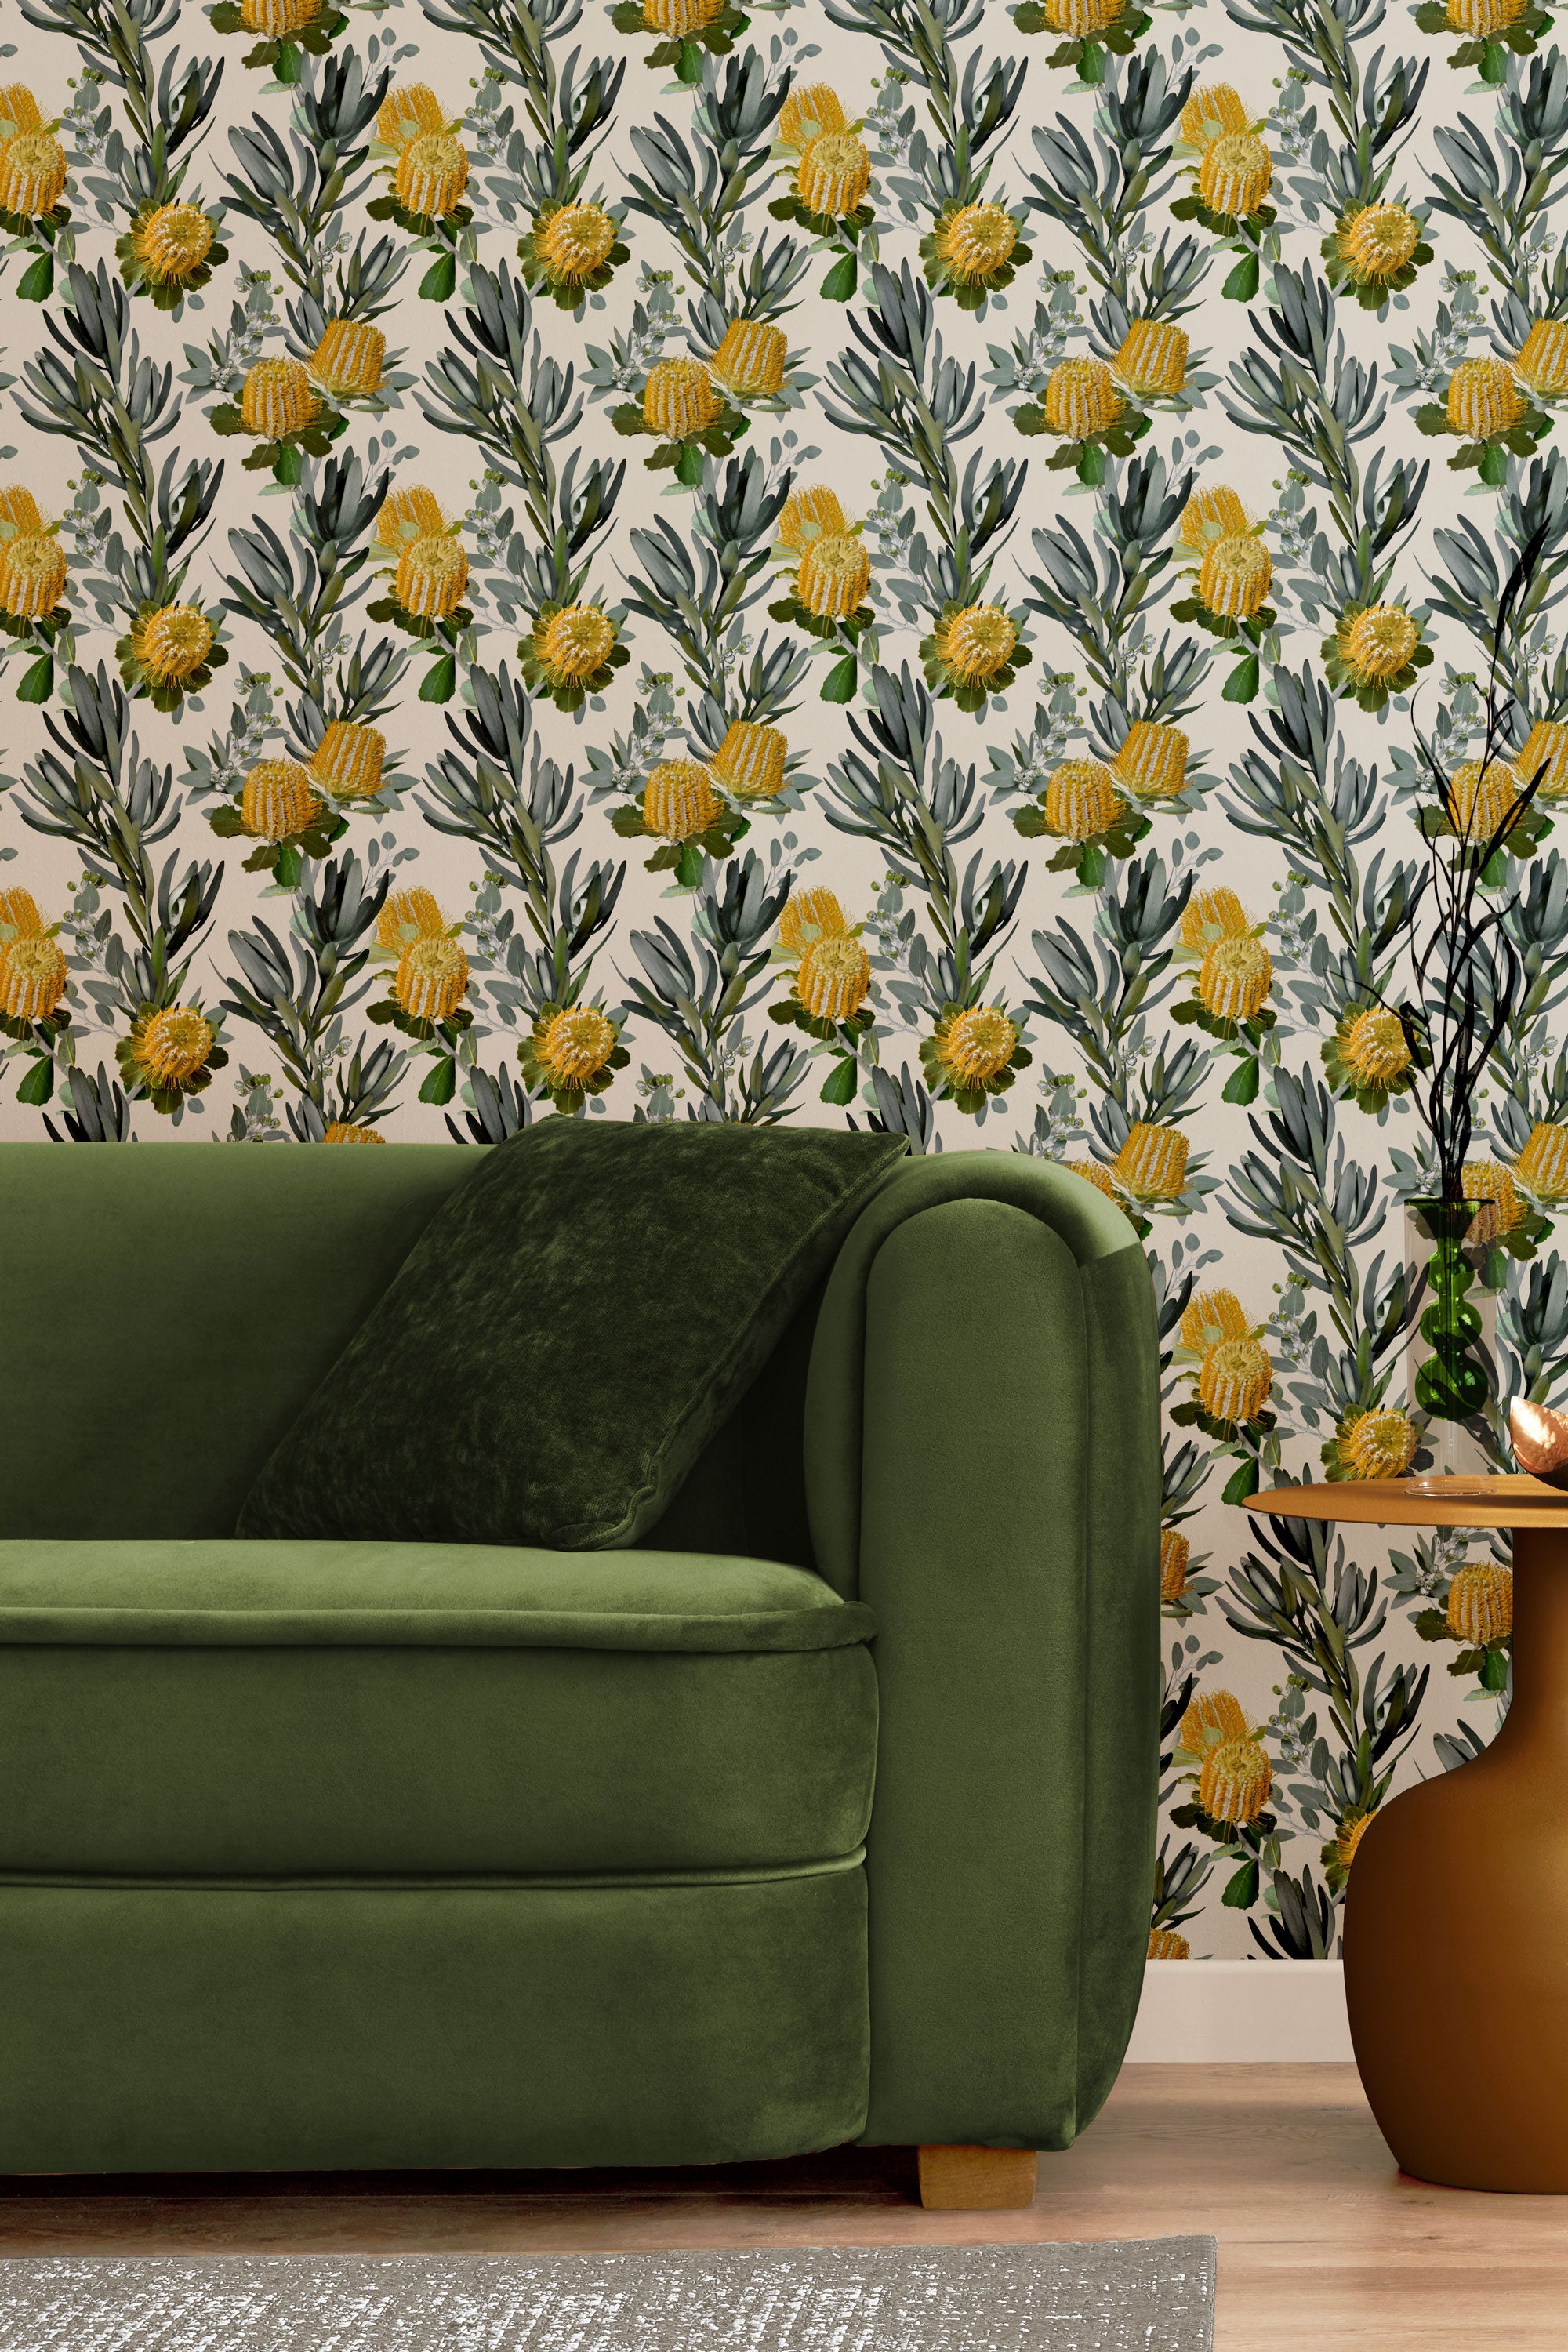 A maximalist living room with a wall papered in a photorealistic floral print in yellow, white, green and cream.